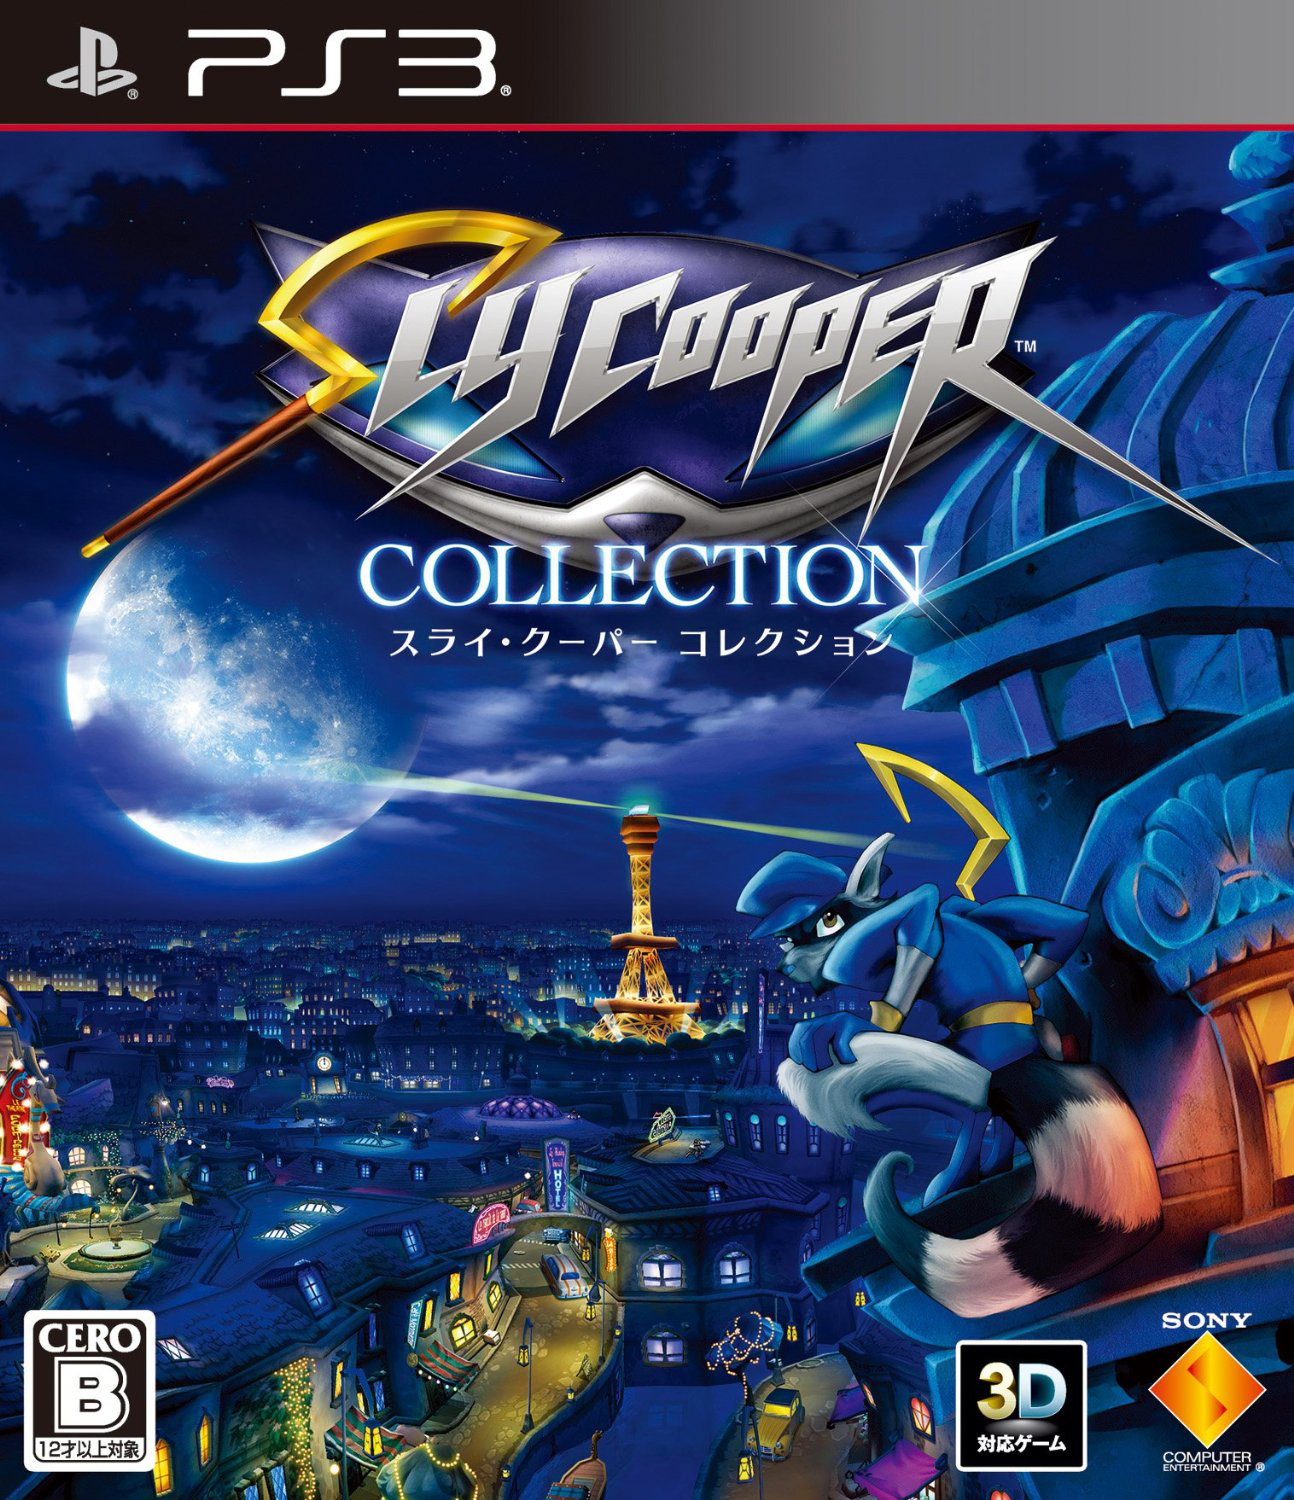 Sly ps3. Слай Купер ps3. Sly Cooper collection ps3 Covers. Sly Cooper ps2. Sly Cooper игра на ps3.